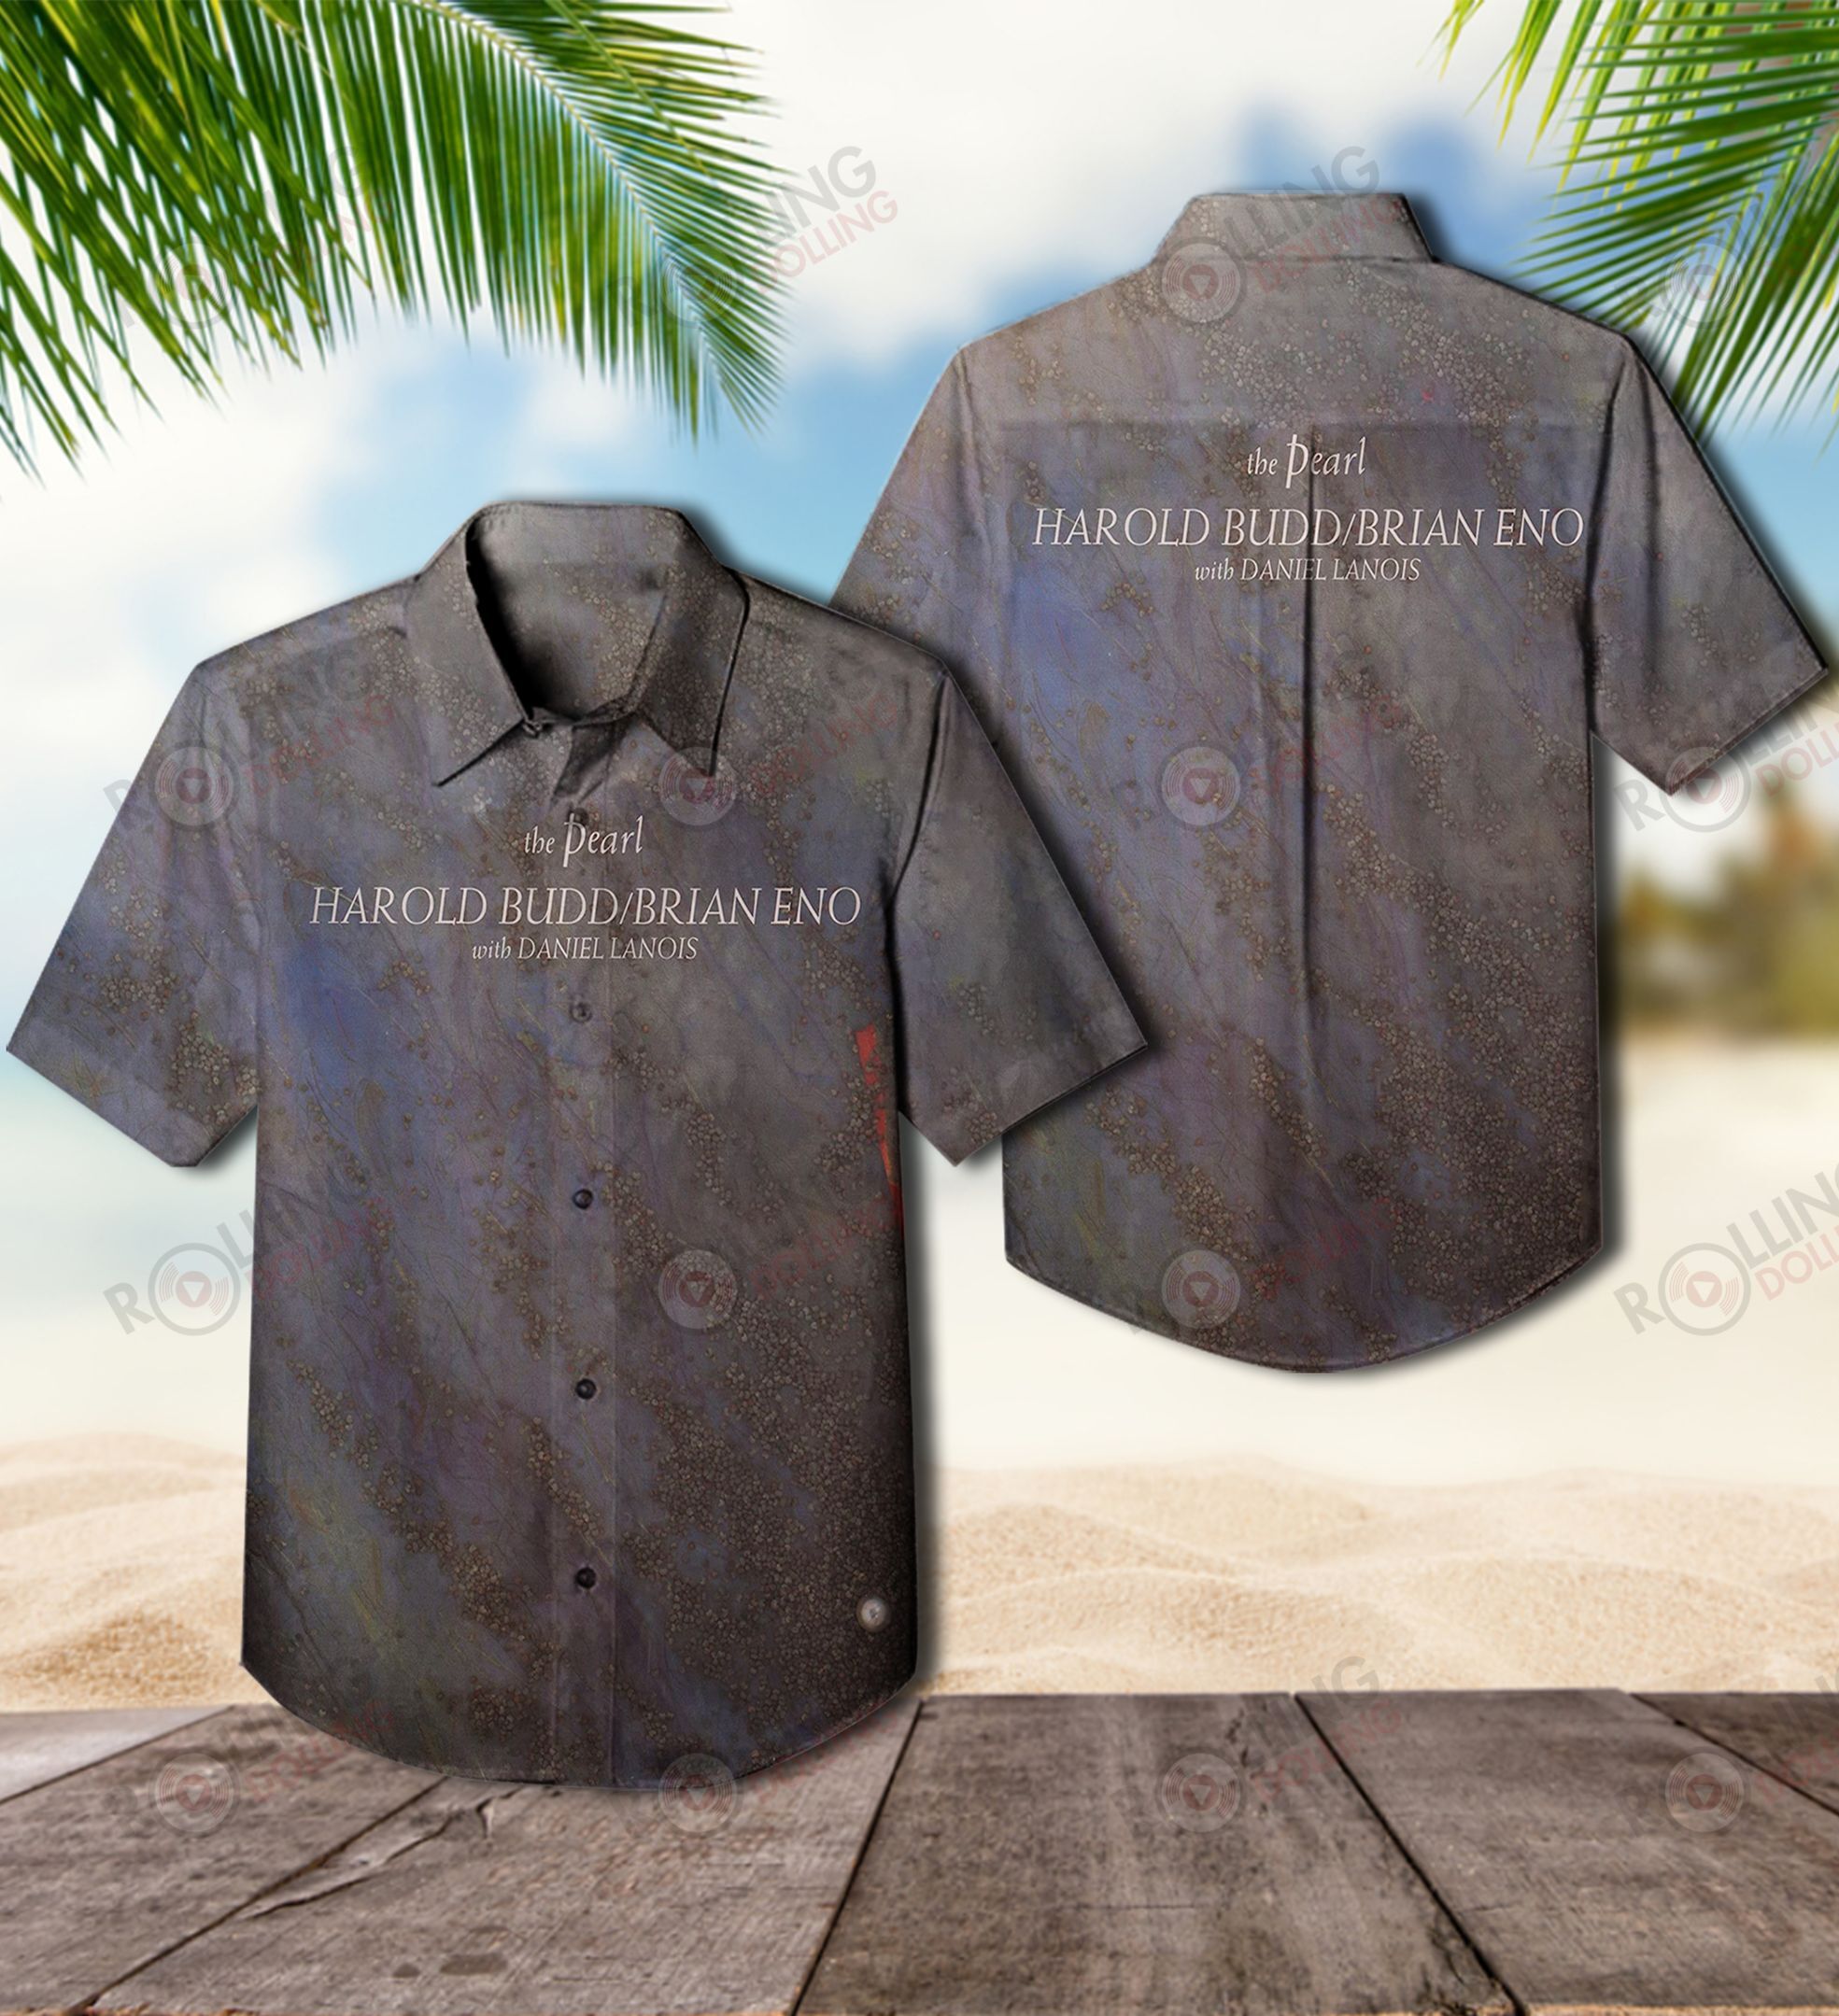 The Hawaiian Shirt is a popular shirt that is worn by Rock band fans 45